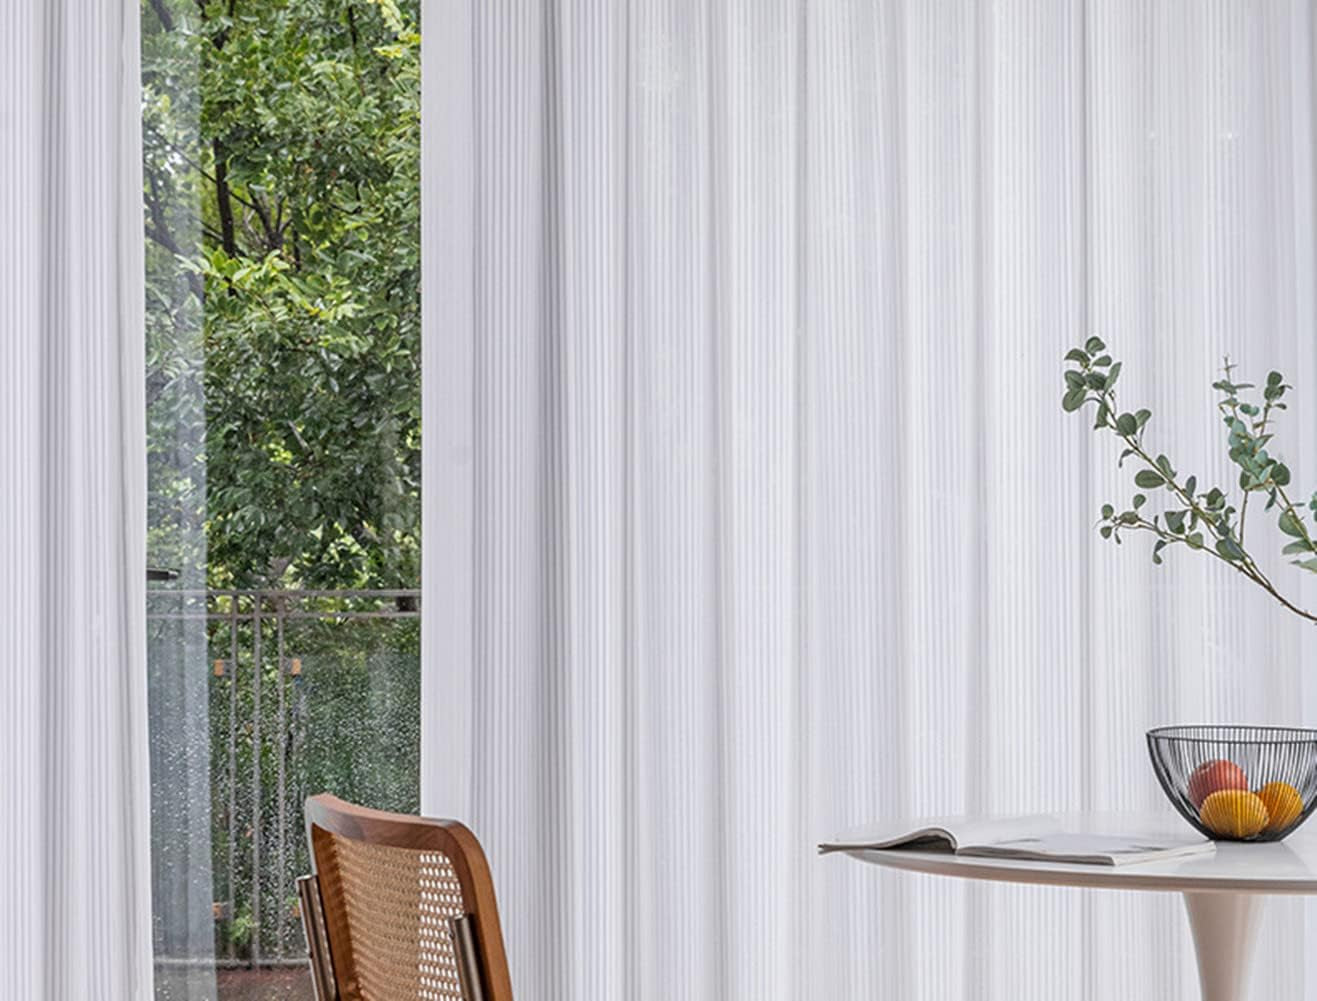 Dothedrape Stripe White Sheer Curtains Window Treatment Pinch Pleated Voile Curtain Panels for Kitchen, Bedroom and Living Room (50 X 90 Inches Long, 1 Panel)  DotheDrape   